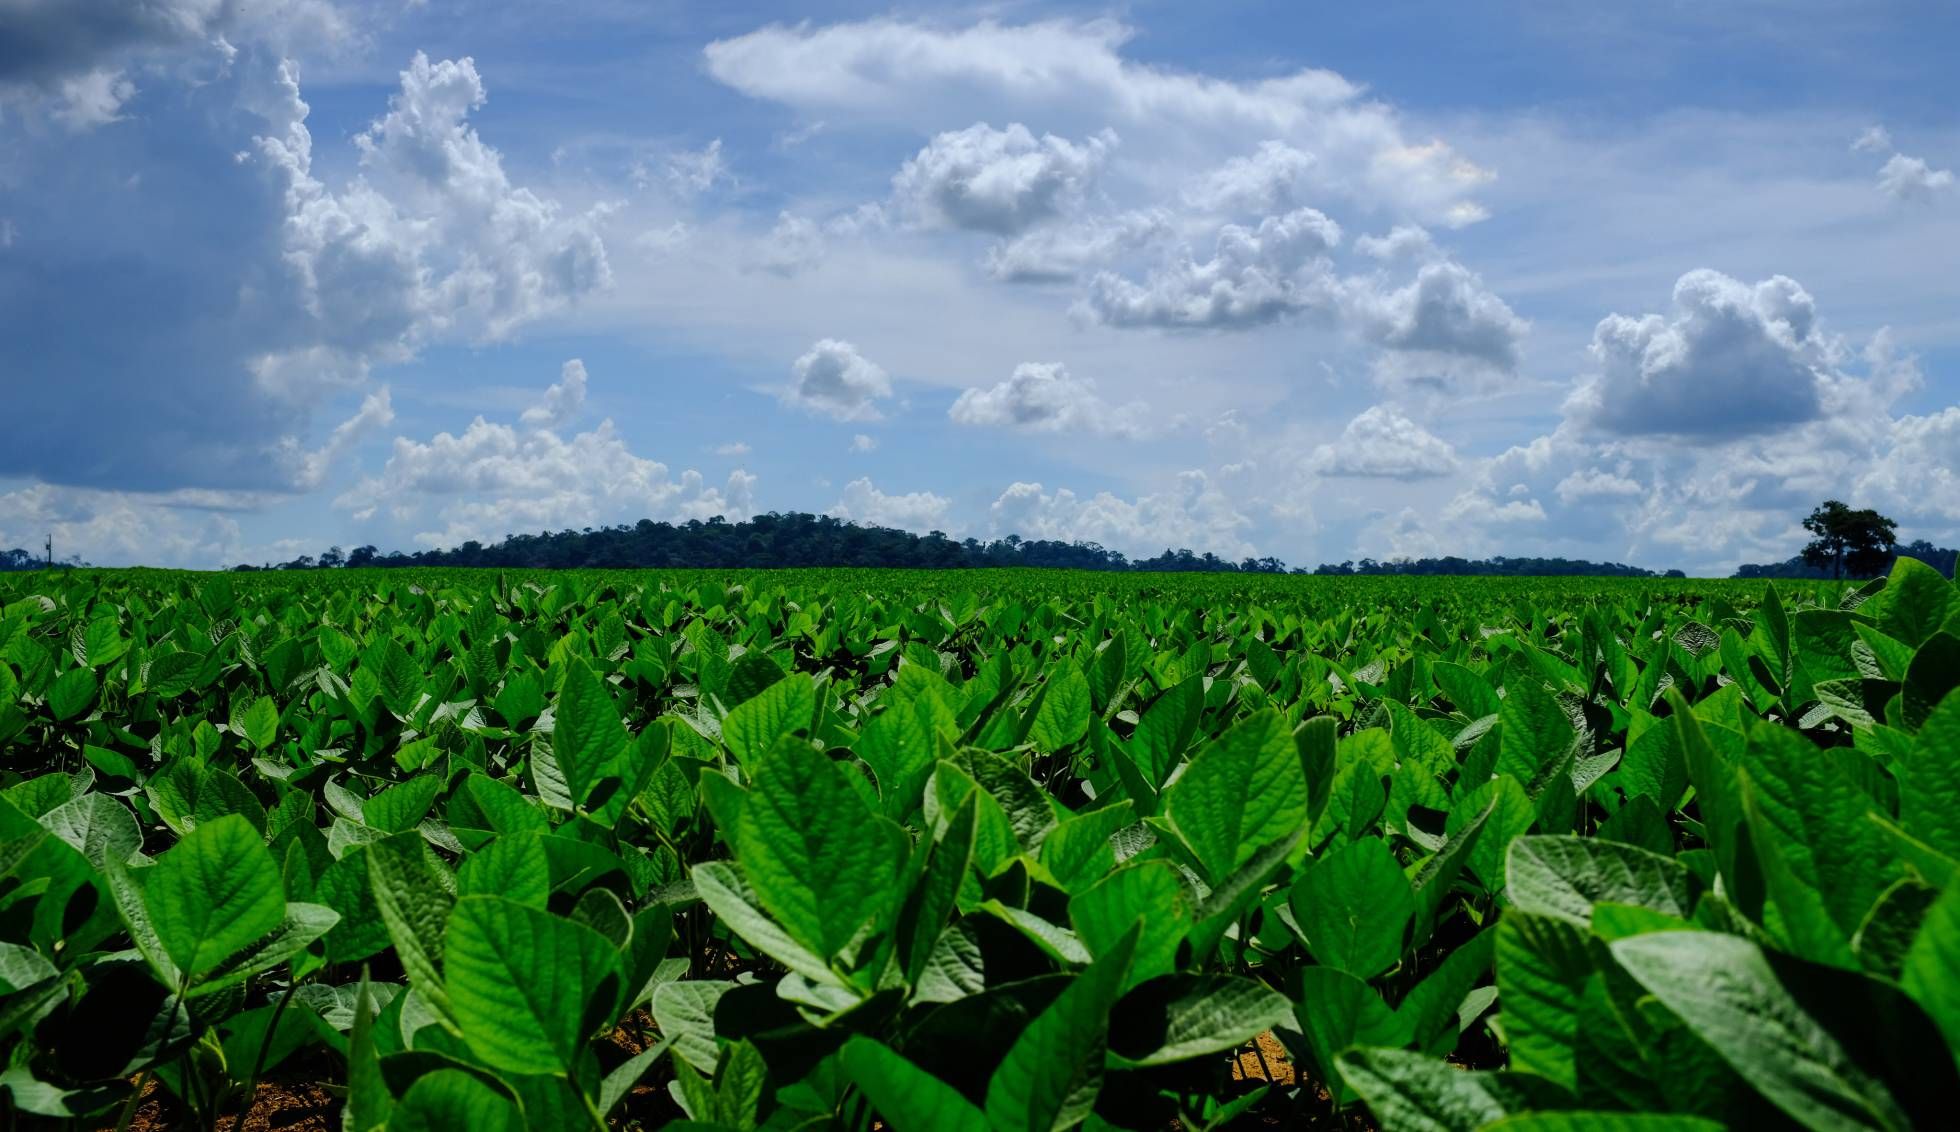 Soy plantations in a field in the outskirts of Sinop. In the horizon, one can see remnants of Amazon forest. Image by Melissa Chan. Brazil, 2019.